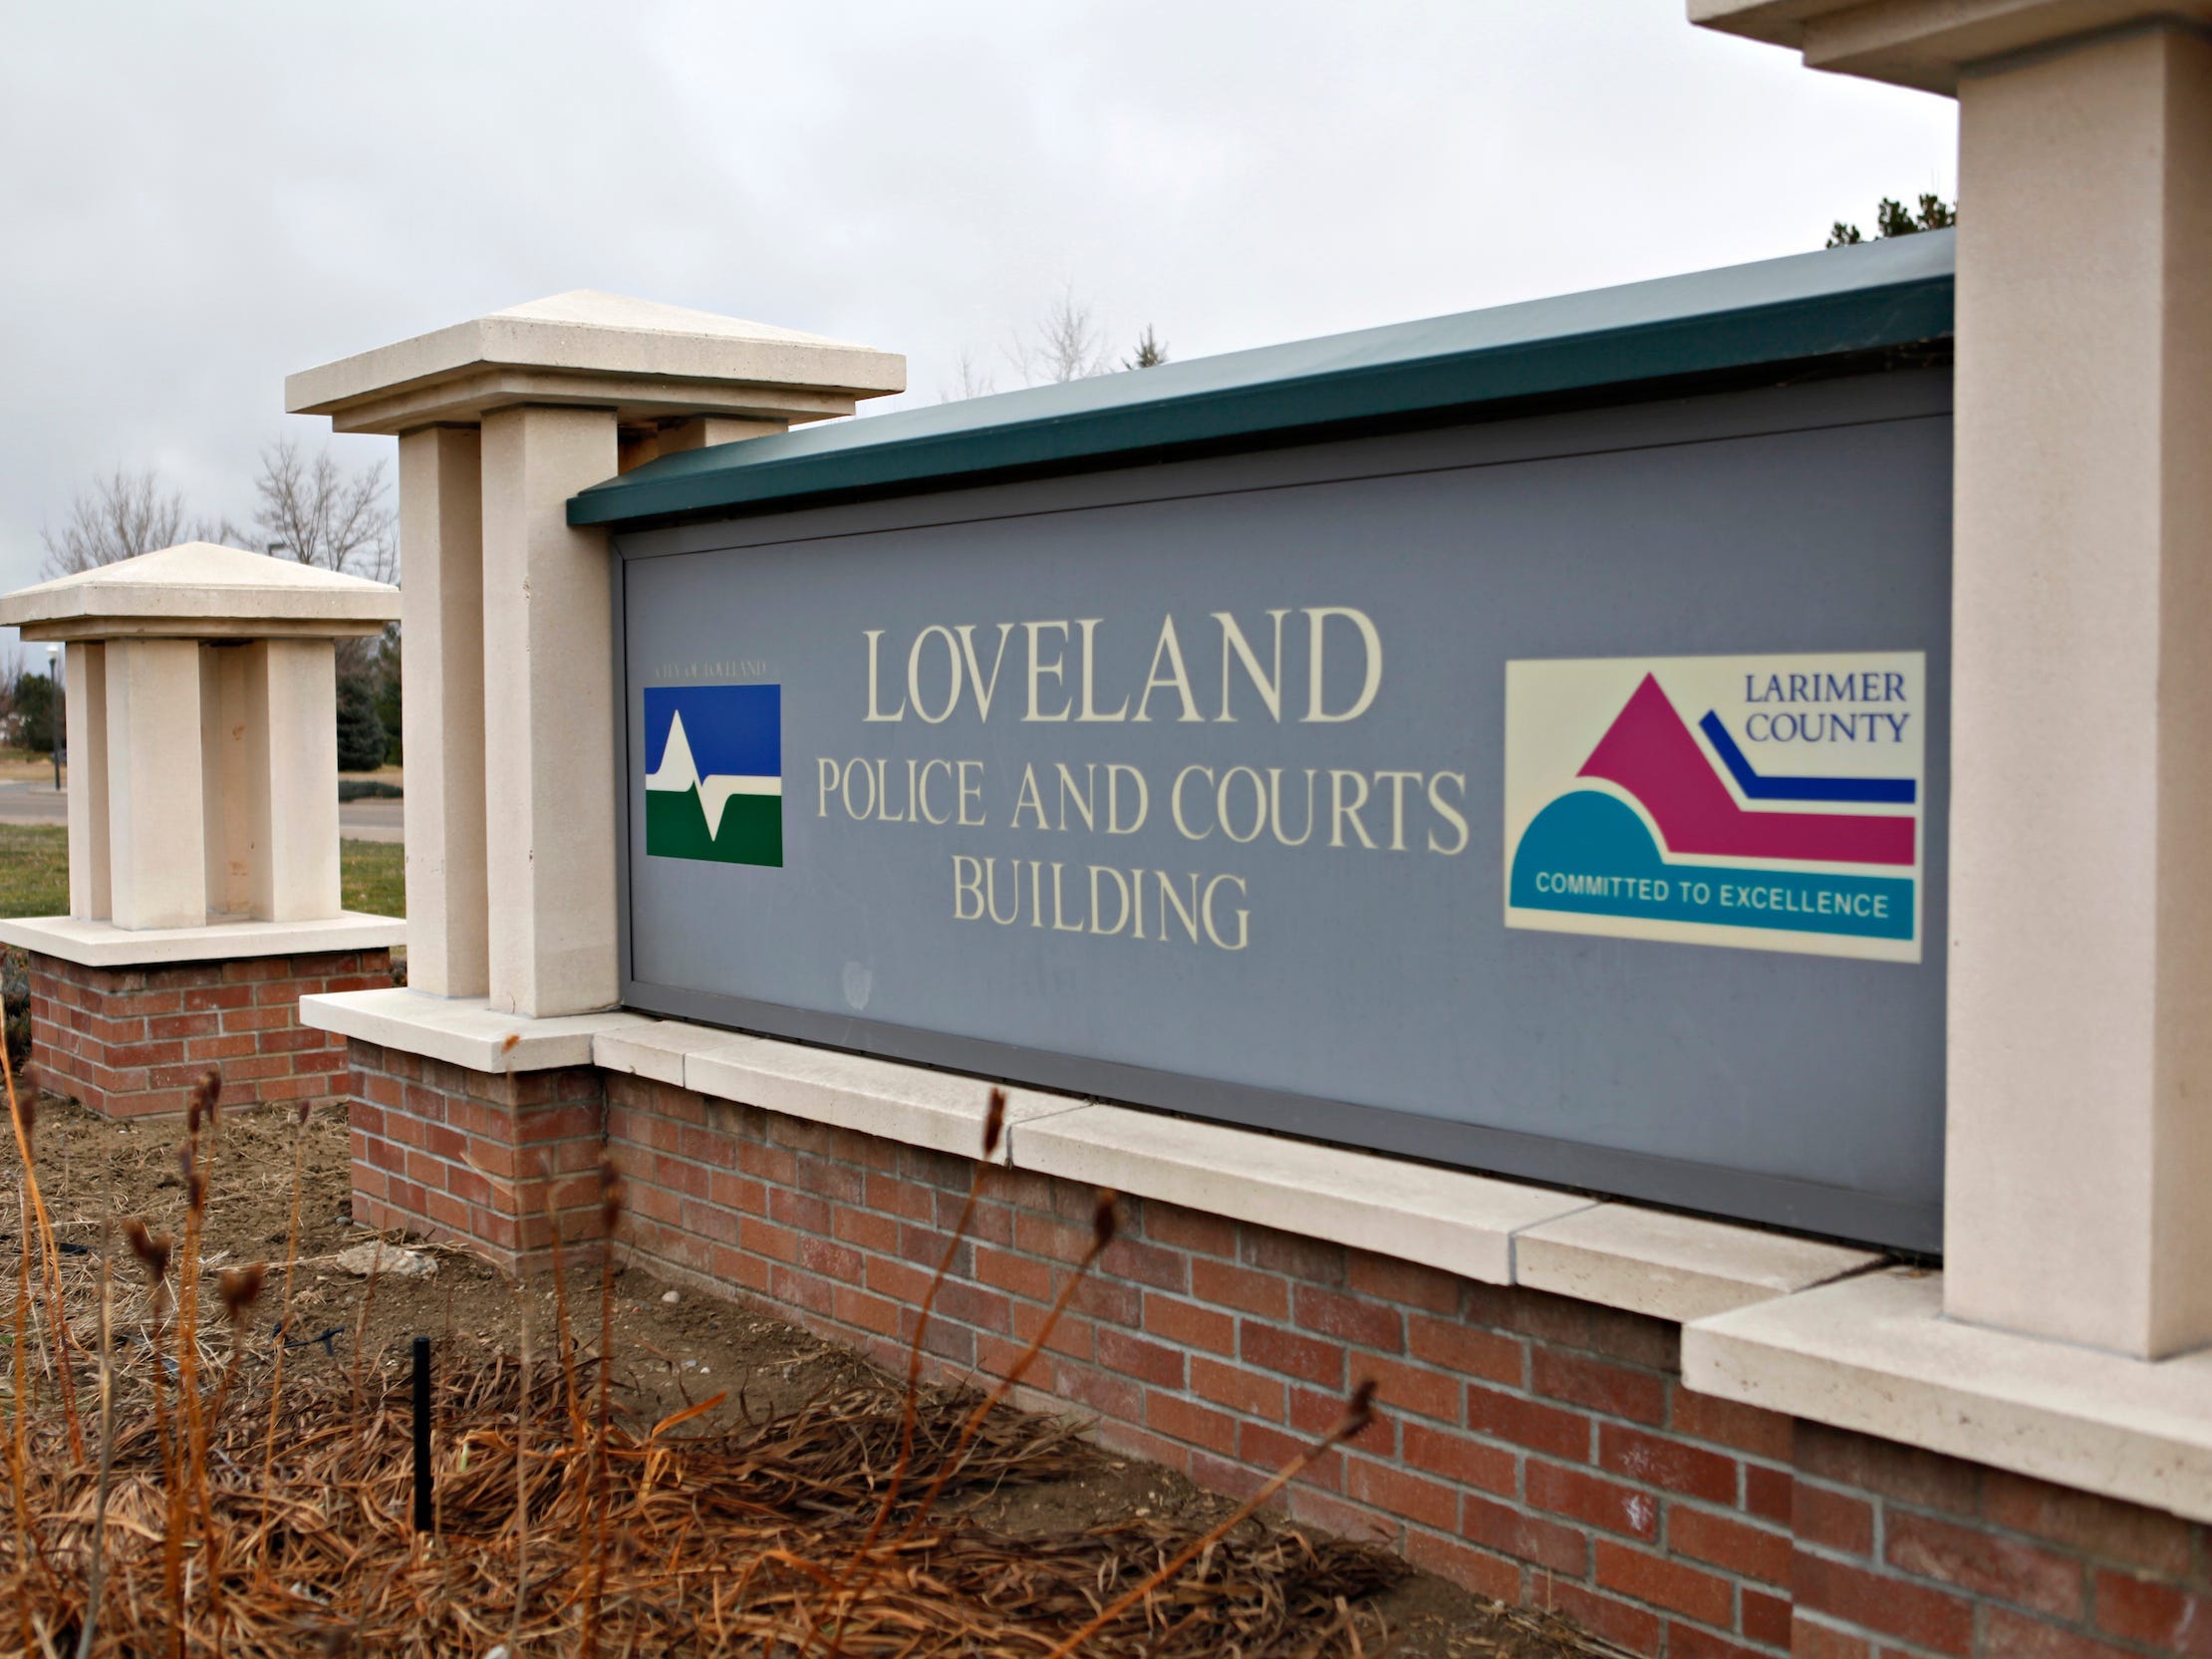 Loveland Police and Courts Building in Loveland, Colorado on March 7, 2016.